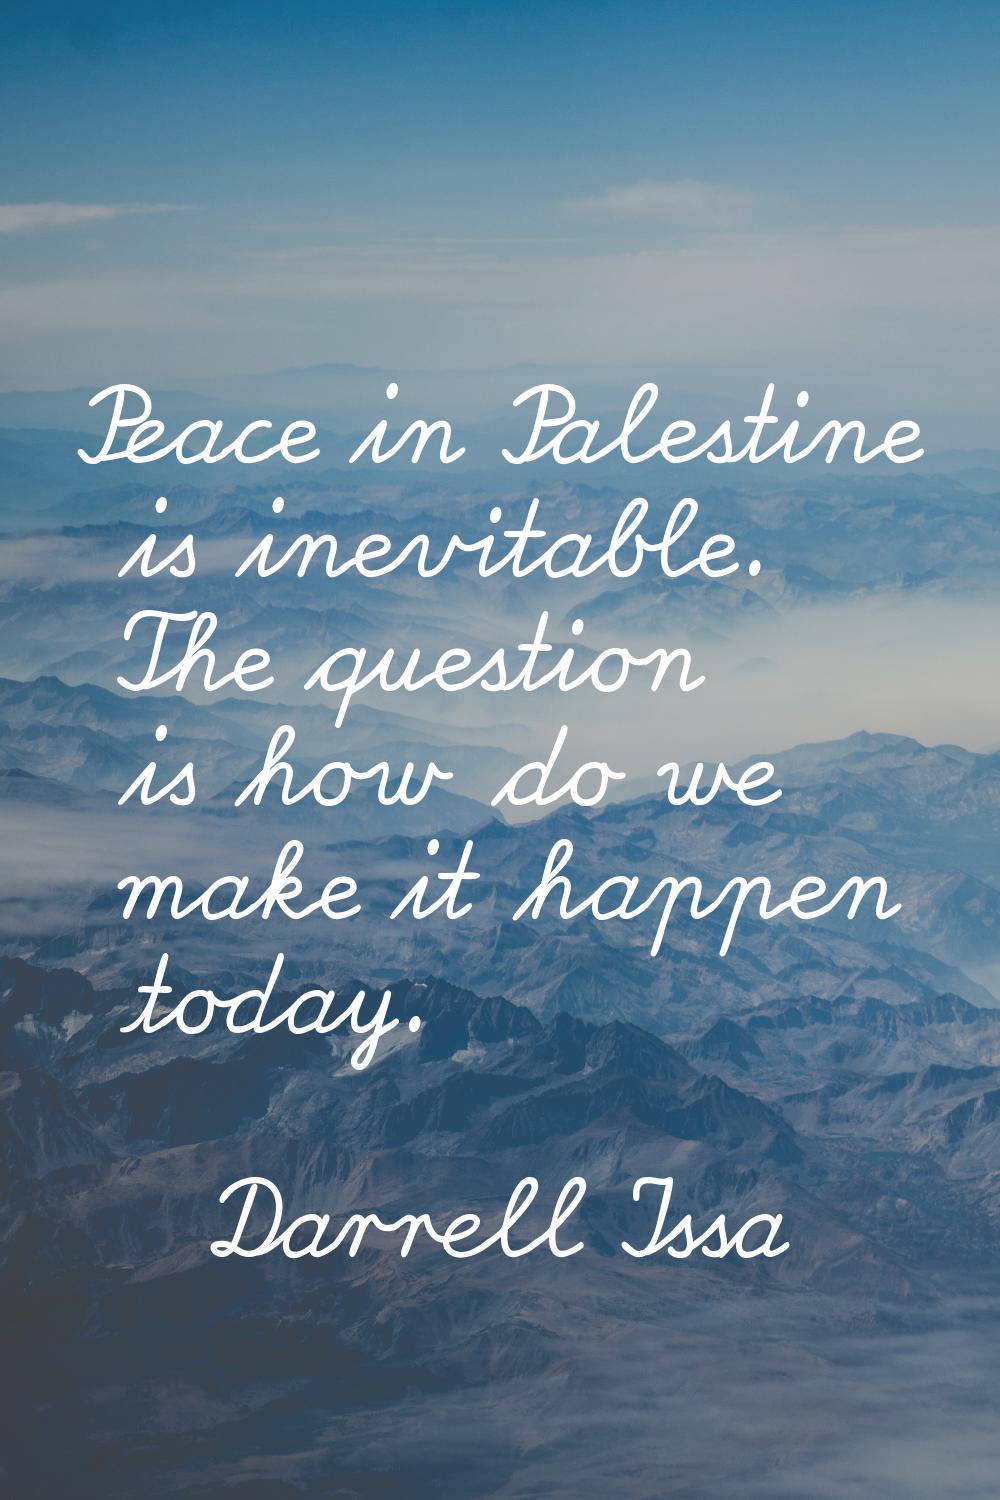 Peace in Palestine is inevitable. The question is how do we make it happen today.